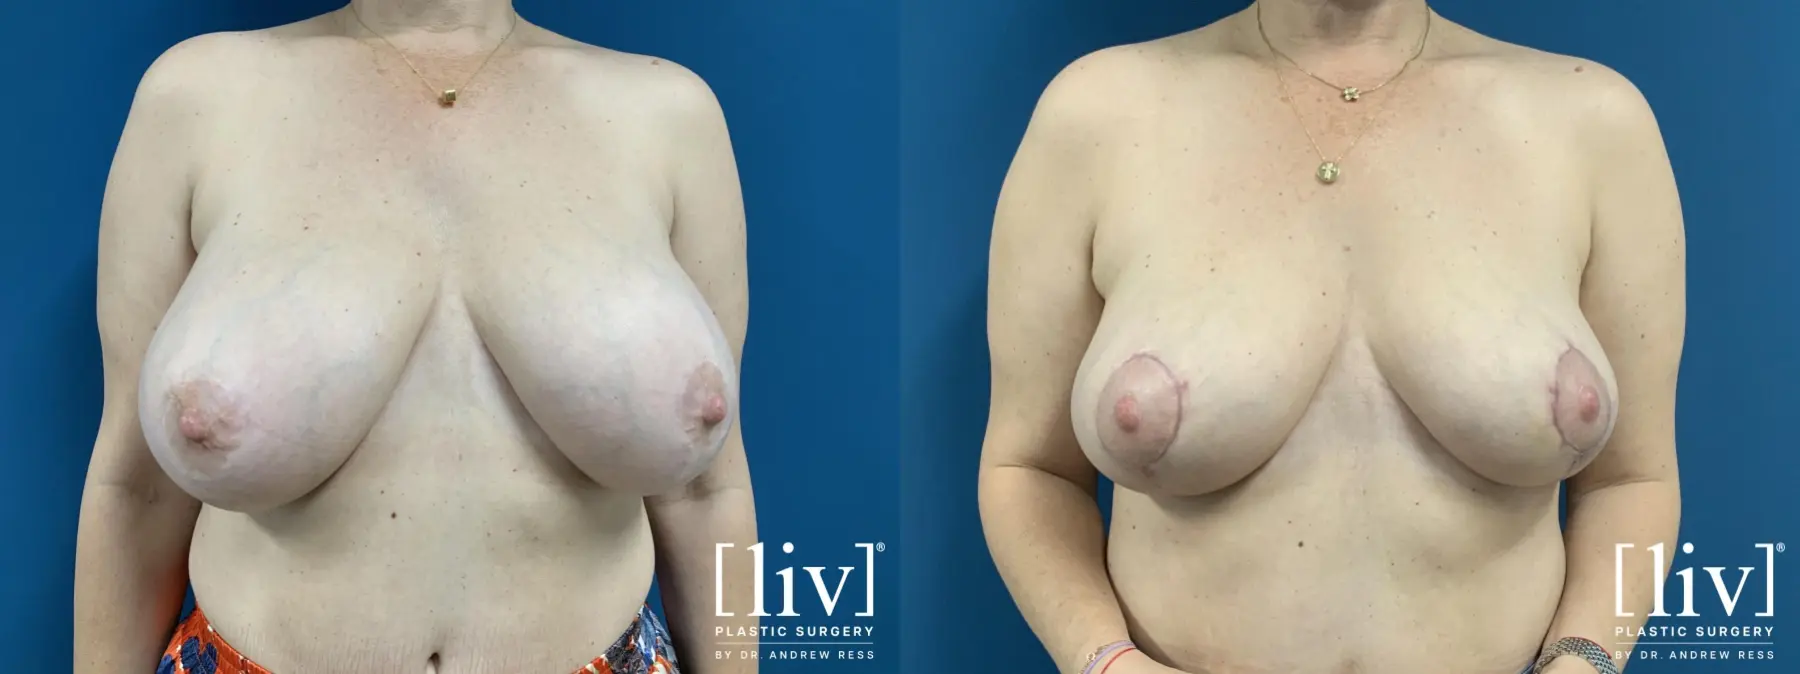 Implant removal with Breast Lift and Fat Transfer to Breast  - Before and After  